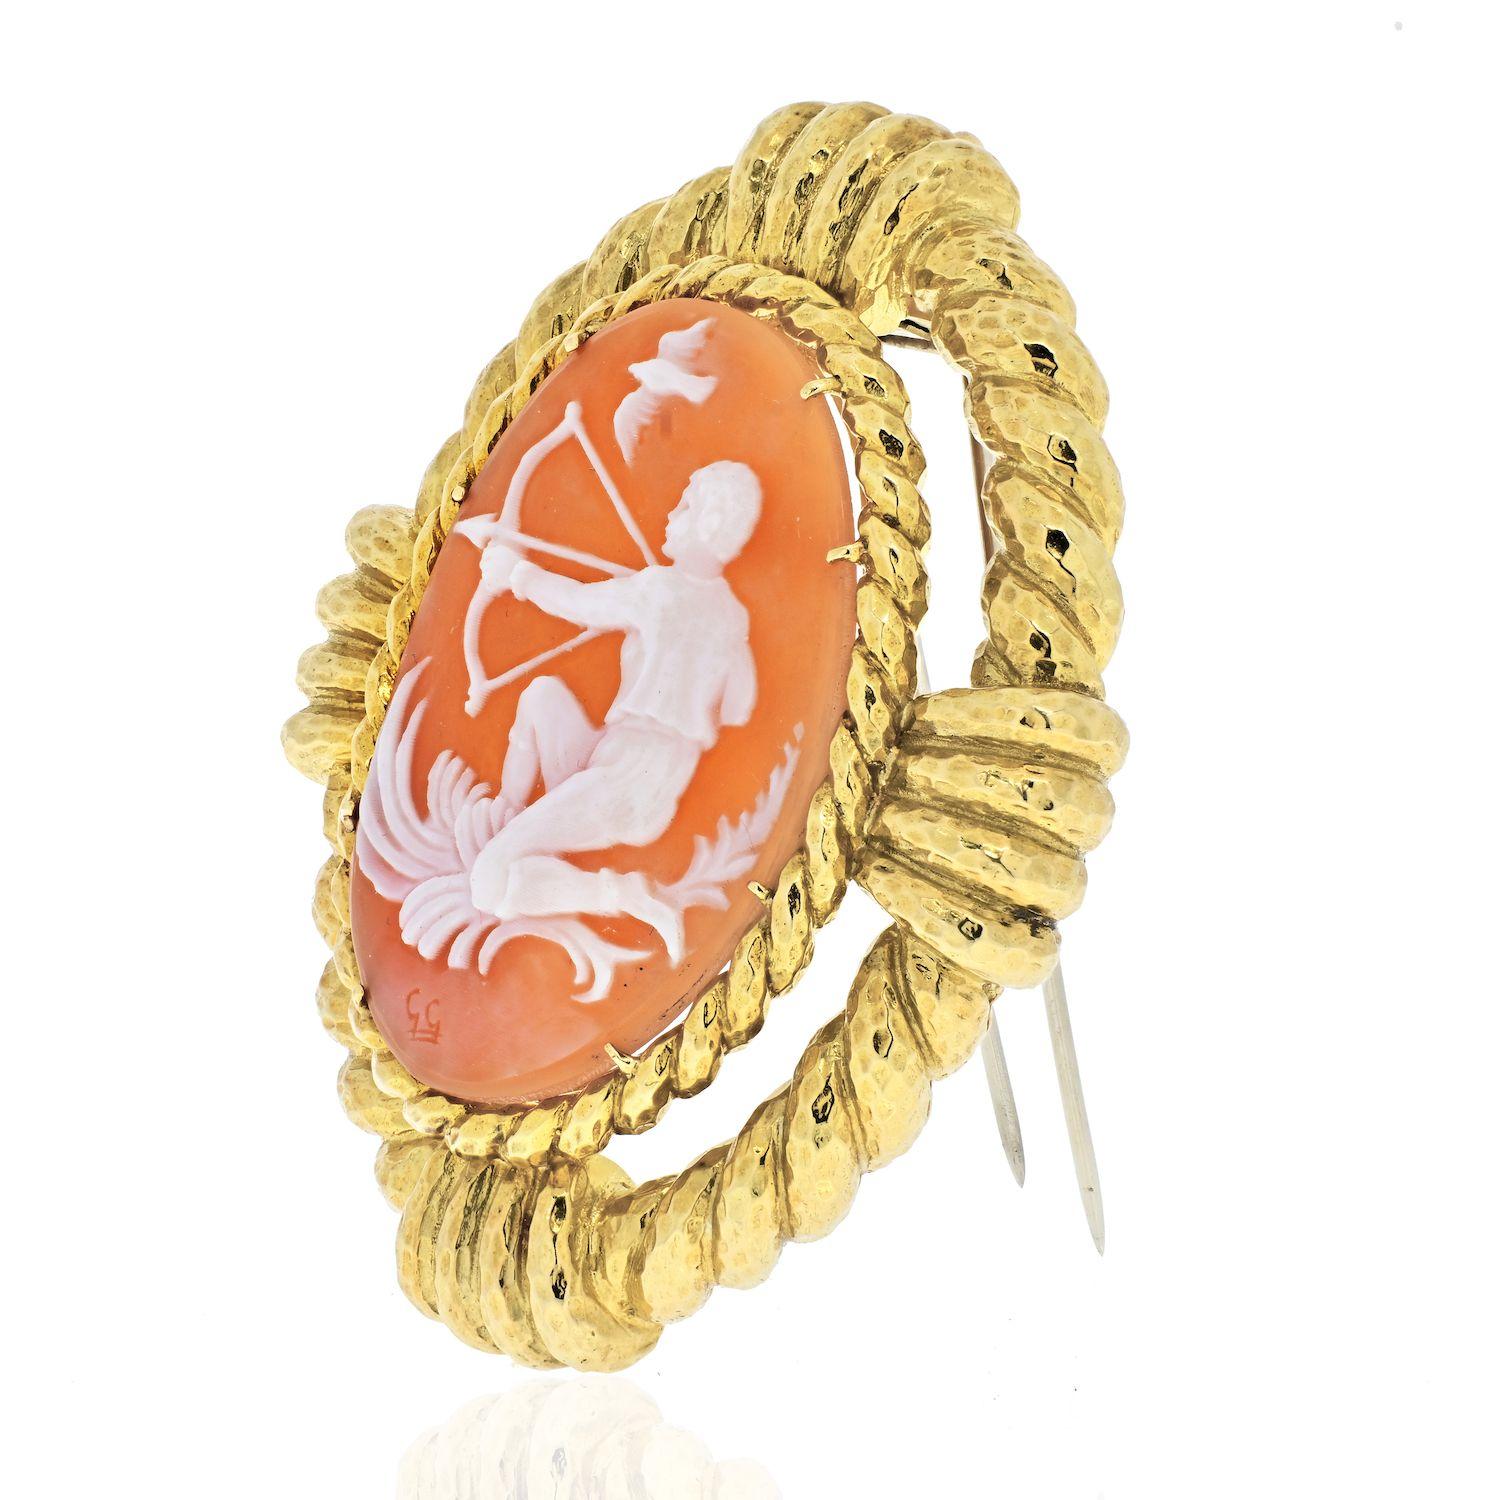 The shell cameo depicting Sagittarius, with a hammered gold frame
18k yellow gold
Signed Webb
2 1/2 x 2 ins; Gross weight 35.9 dwts
Can be worn as a pin and as a pendant.
